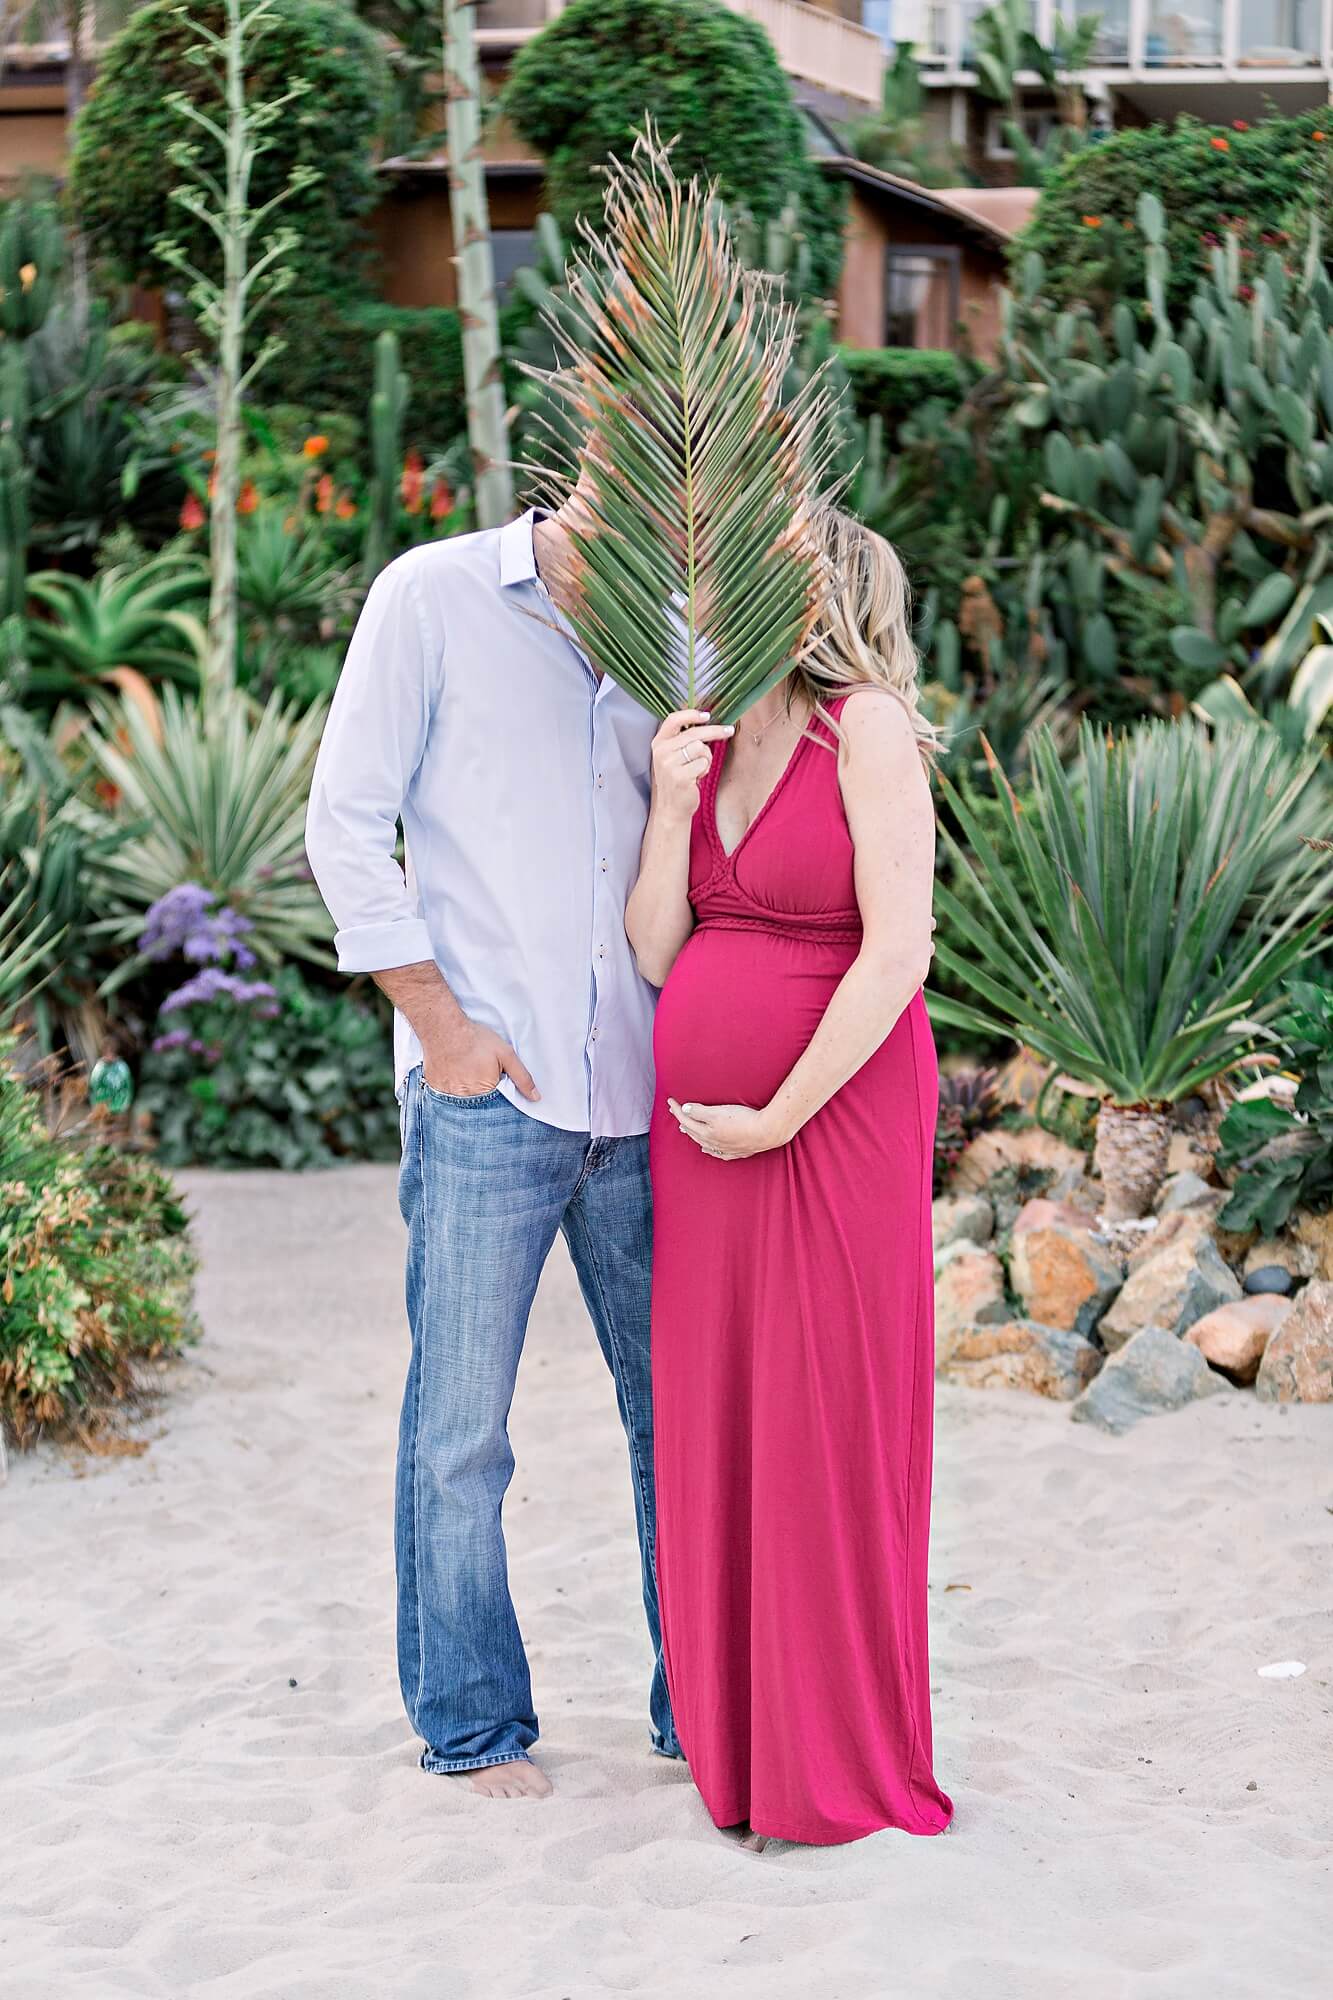 What to Wear to Your Maternity Photo Shoot, Part 1, Clothing